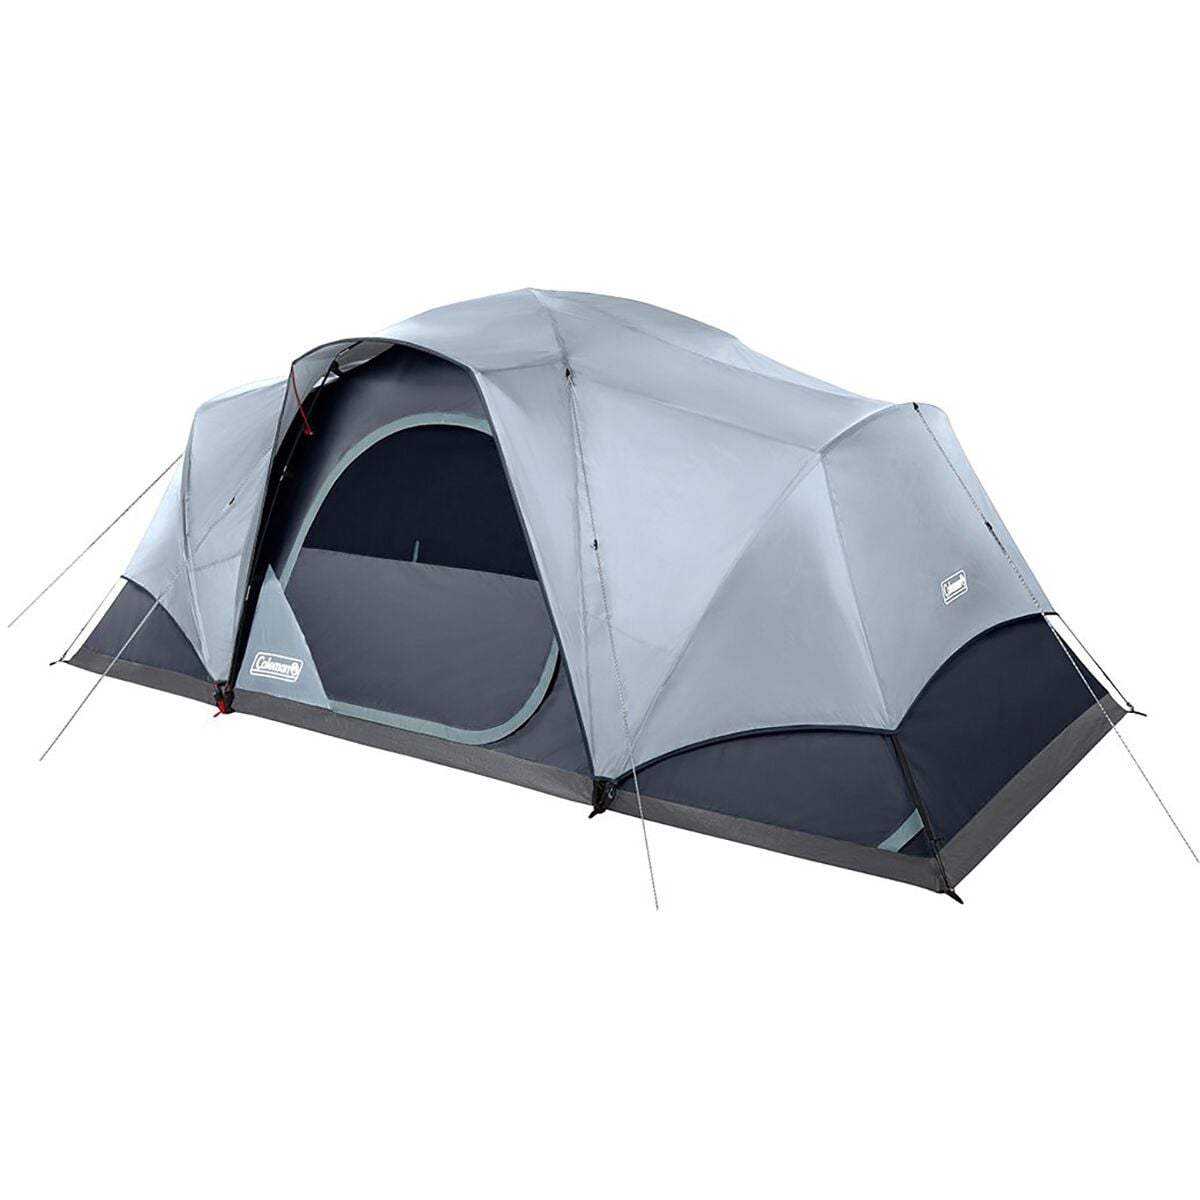 Coleman Skydome Tent XL With Lighting: 8-Person 3-Season